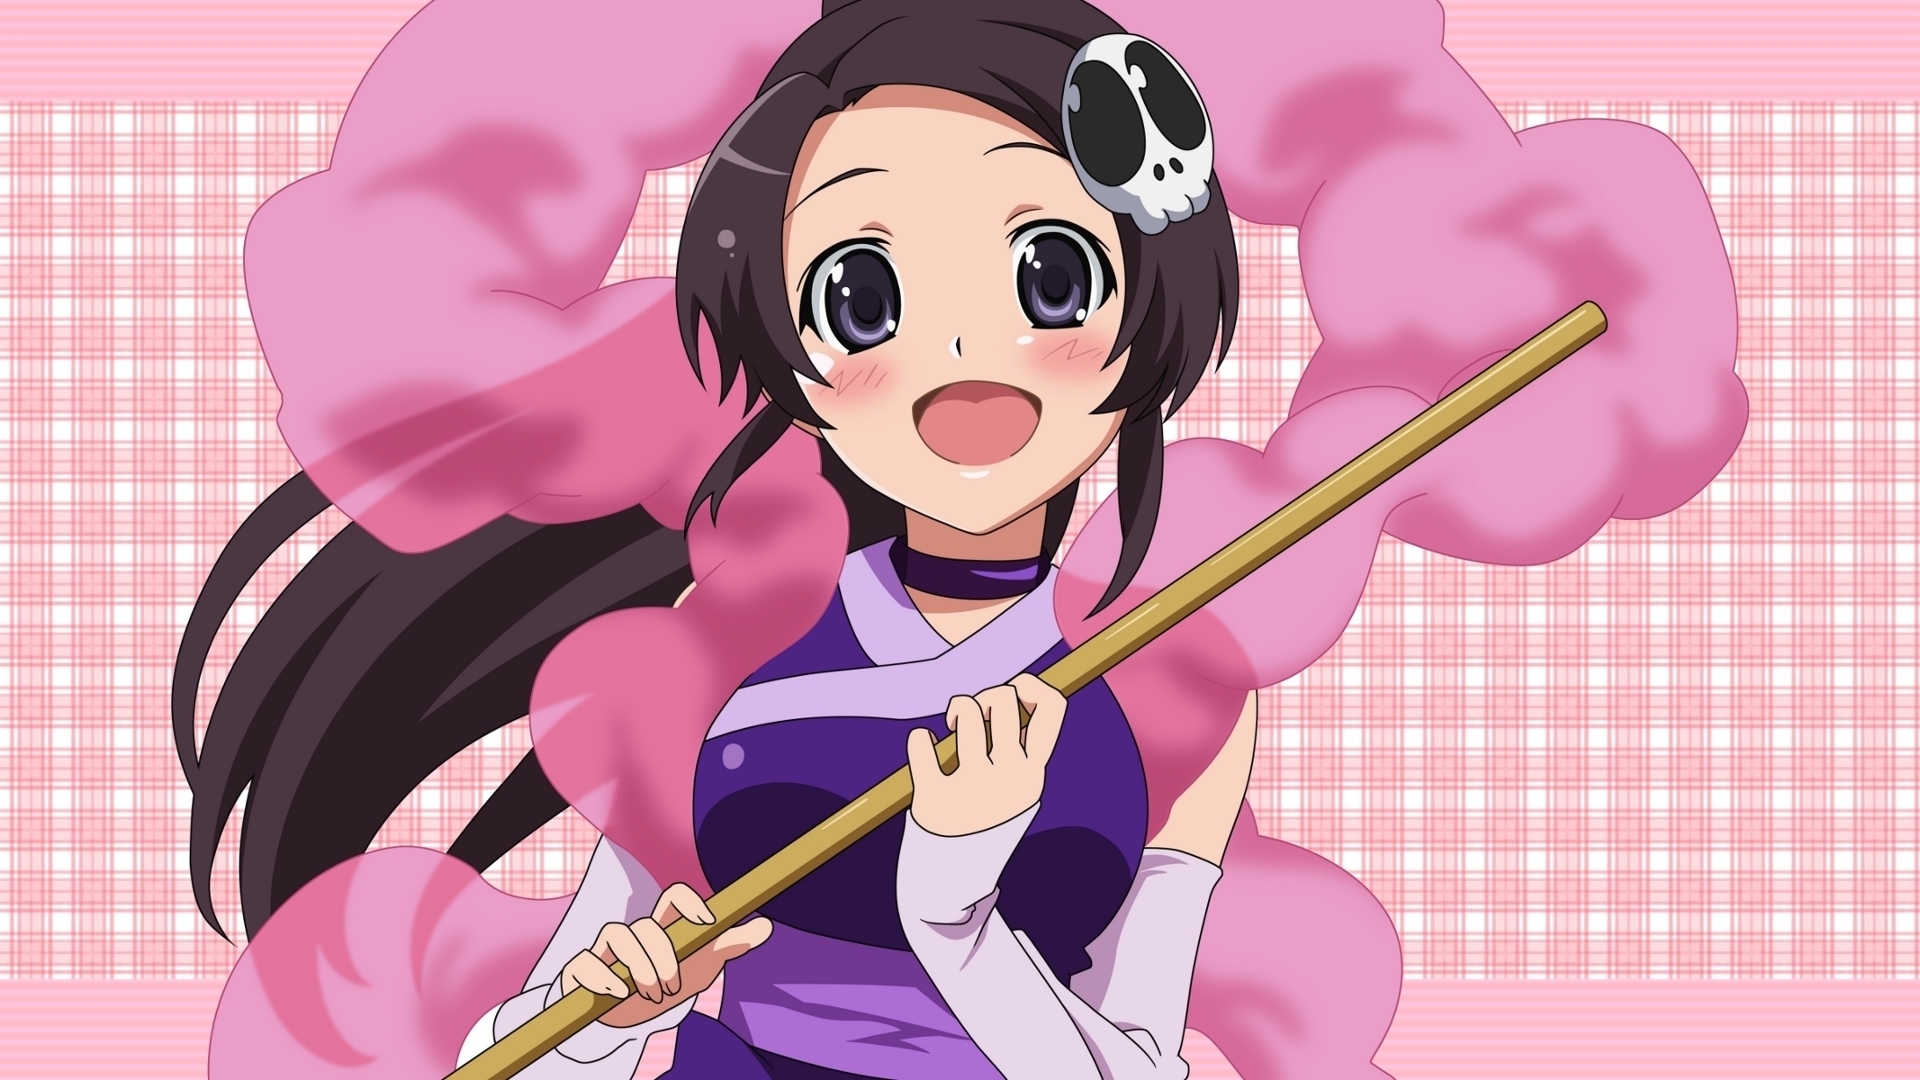 14 The World God Only Knows HD Wallpapers | Backgrounds ...